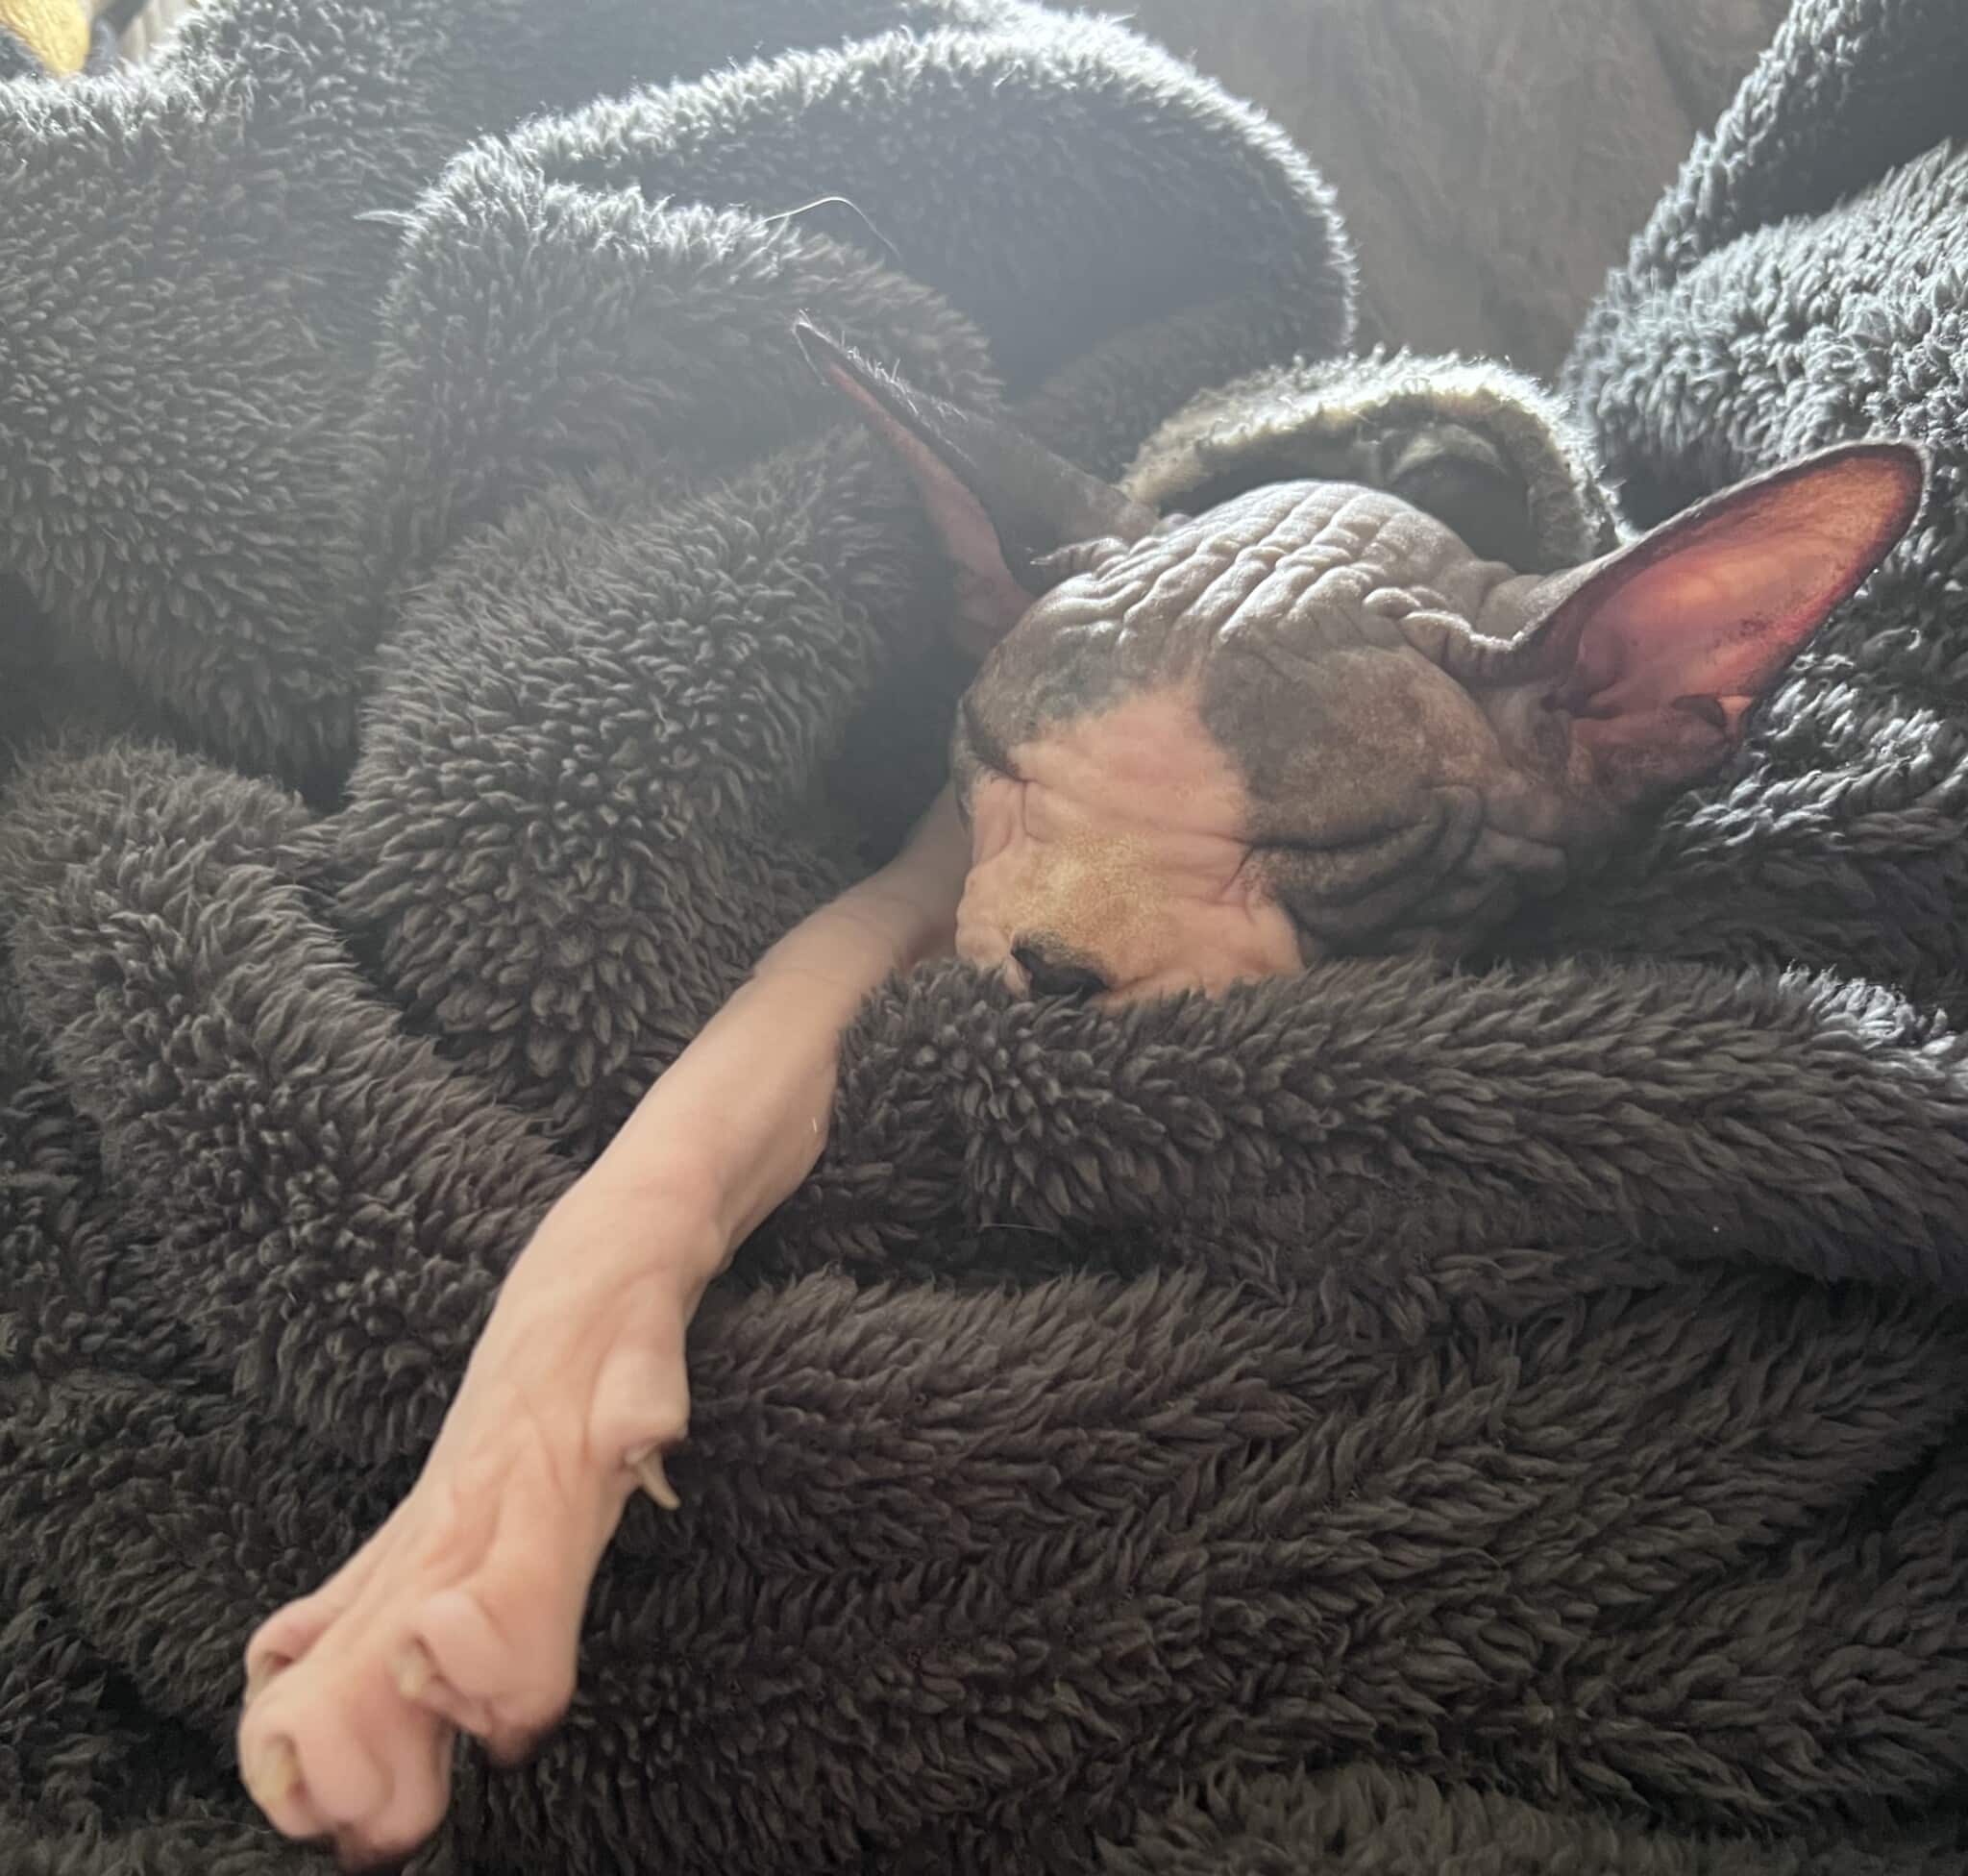 Sphynx cat takes a cozy nap with a blanket